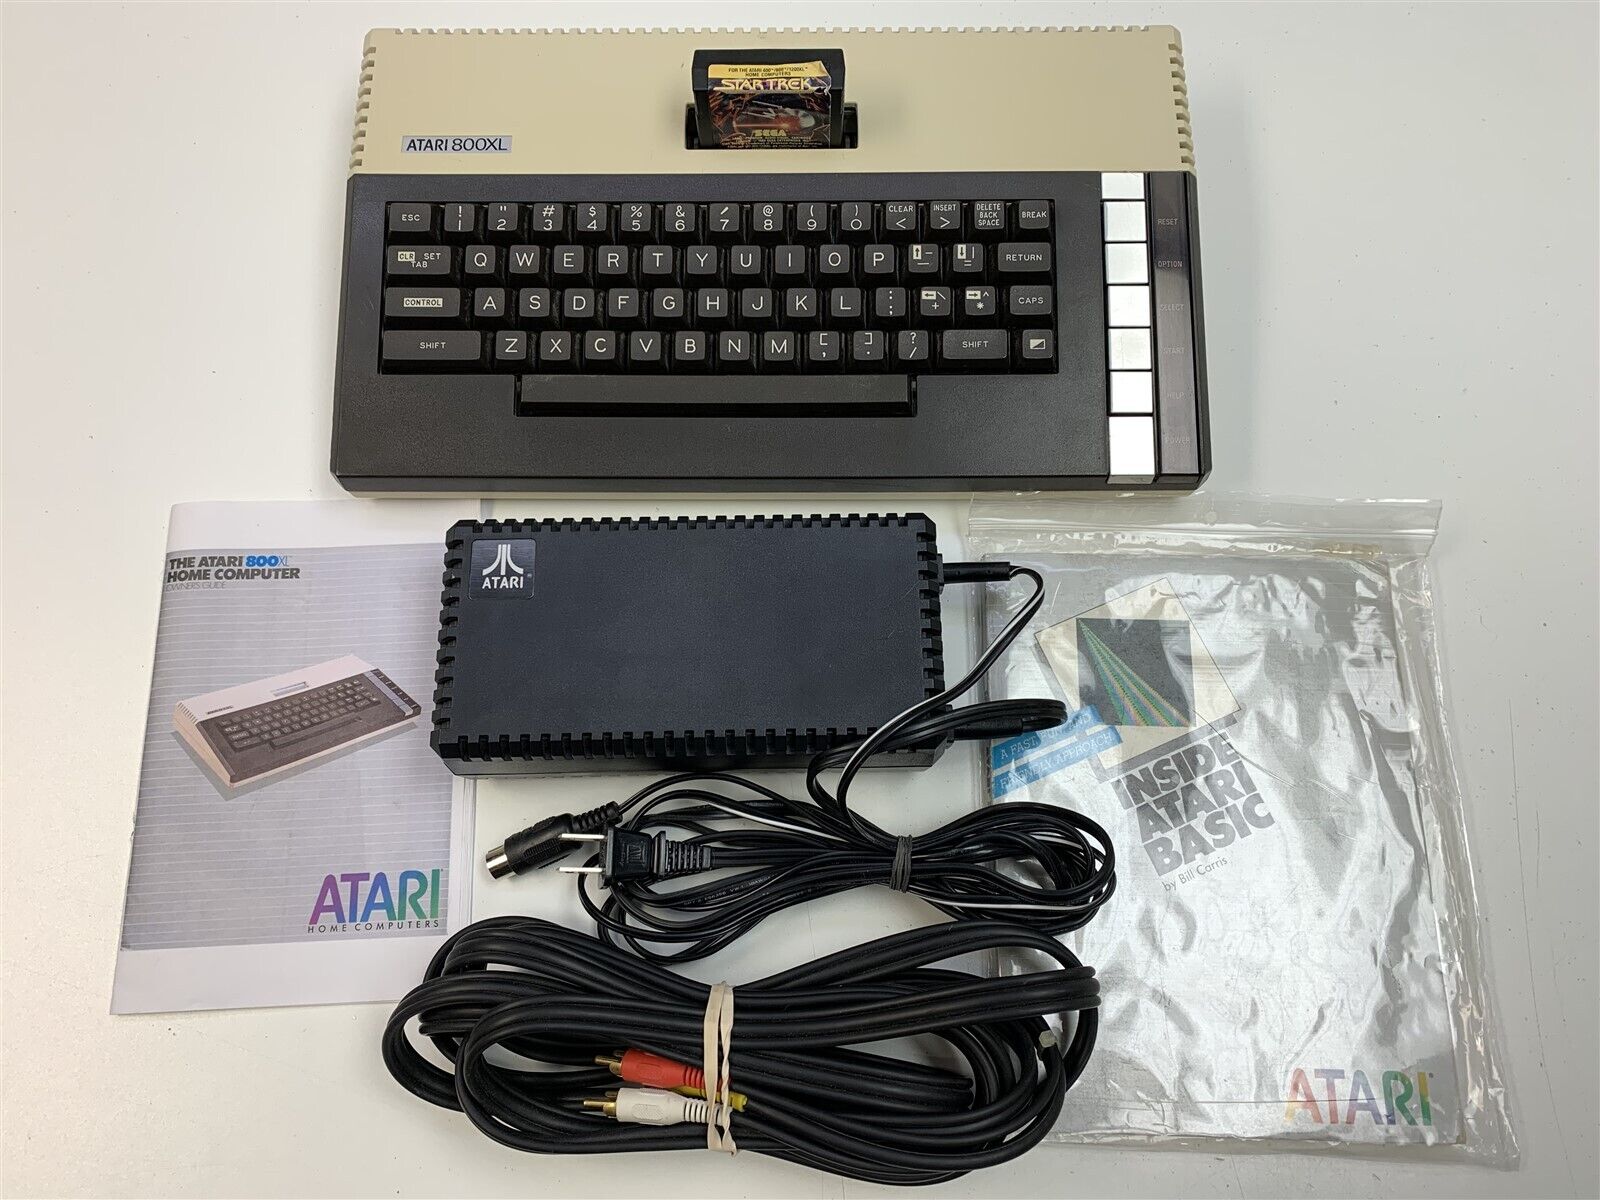 Atari 800 XL Home Computer with Power Supply and Star Trek Game